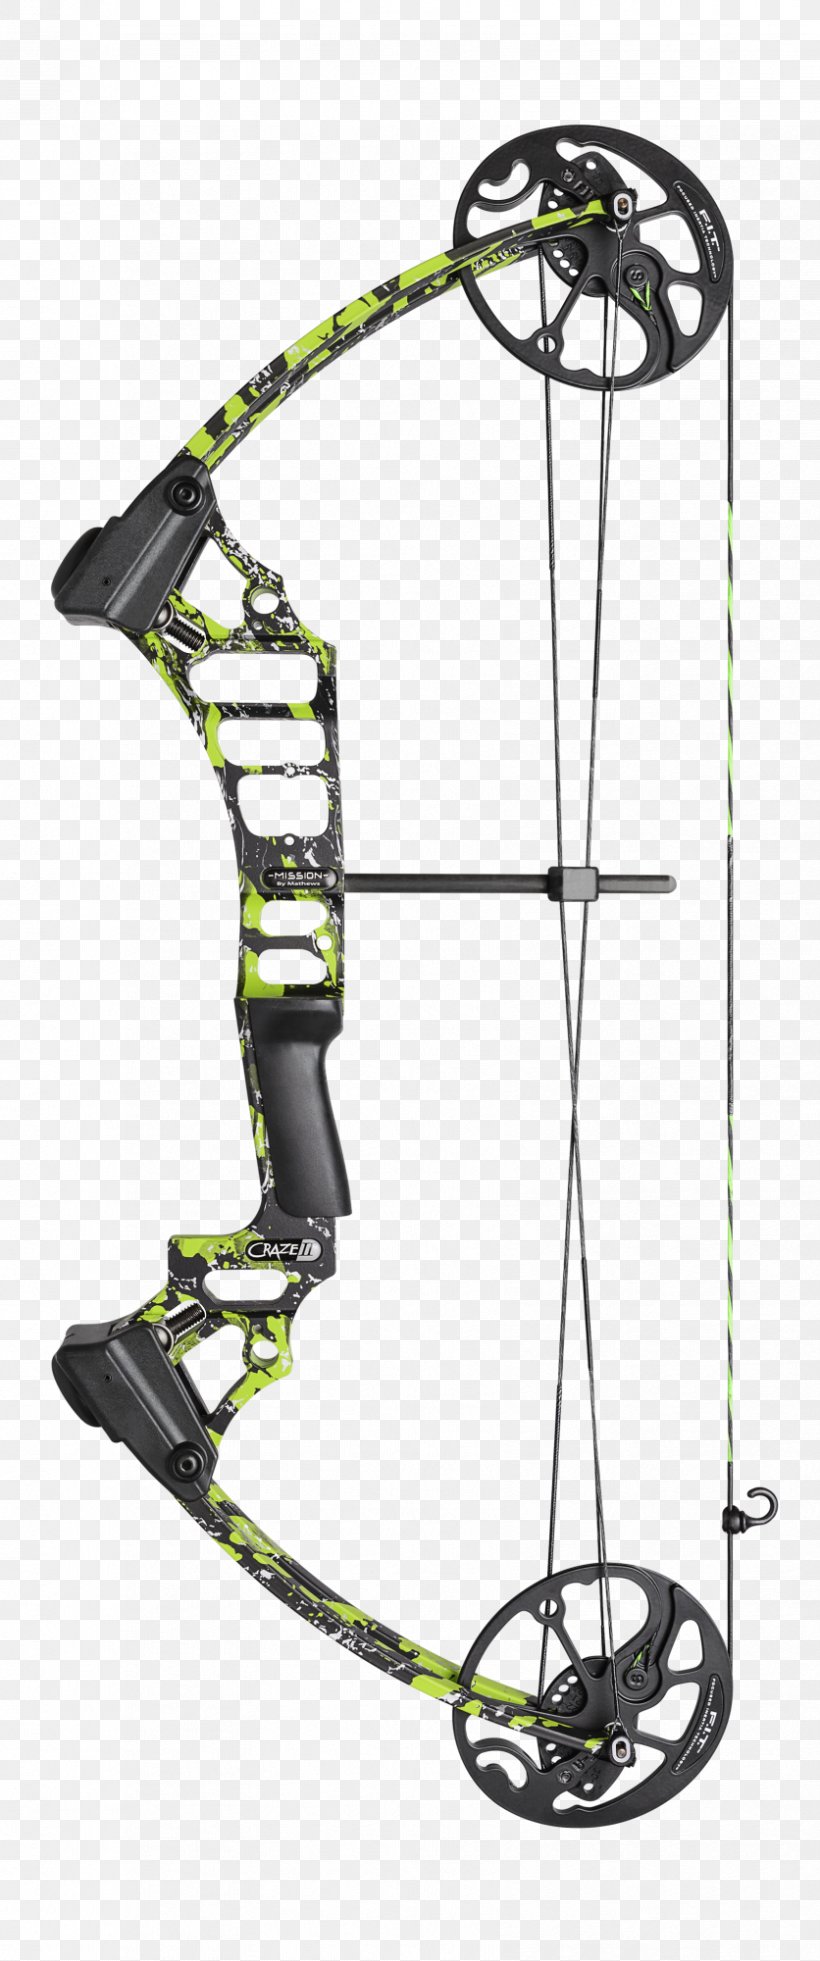 Compound Bows Bow And Arrow Archery Bowhunting, PNG, 836x2000px, Compound Bows, Archery, Bicycle Accessory, Bow And Arrow, Bowhunting Download Free